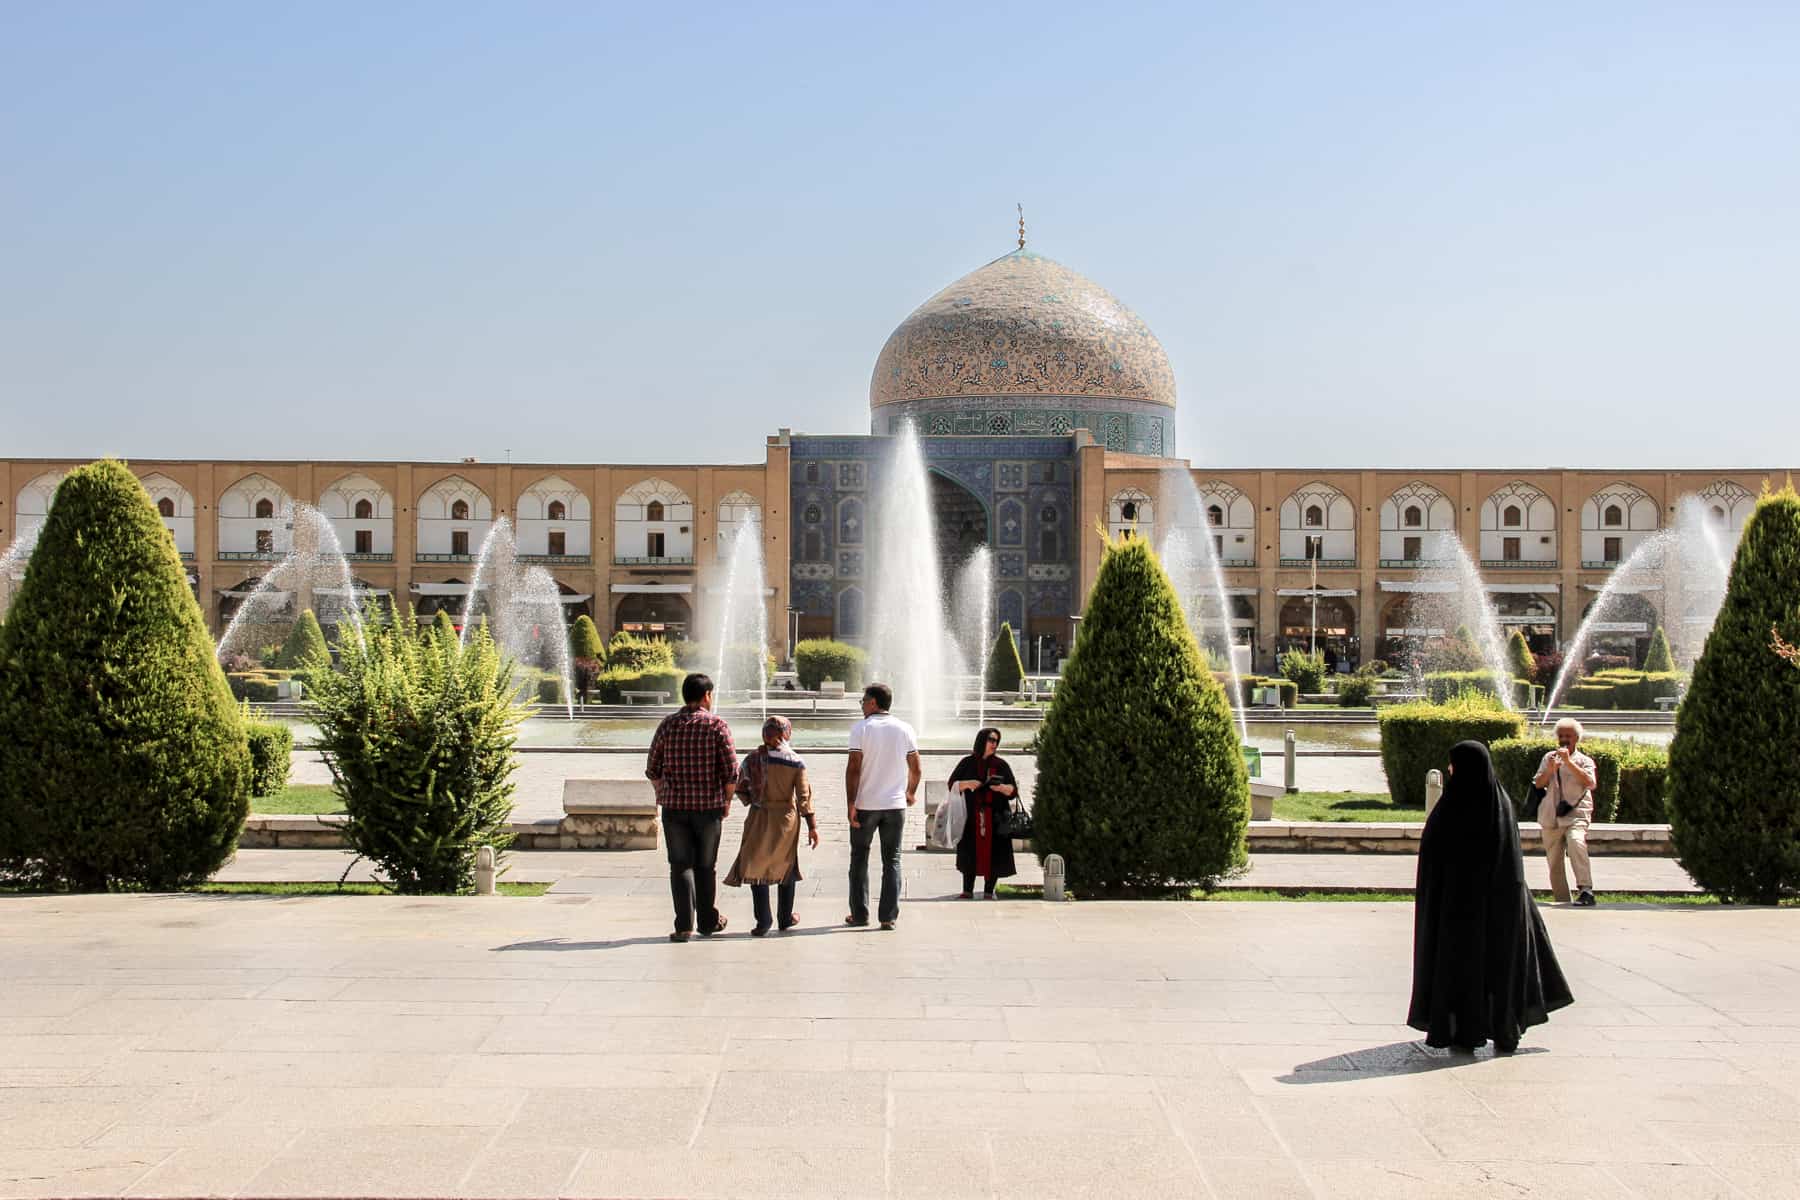 Visitors walking in the garden grounds in front of The Great Mosque Masjid-e Jameh of Isfahan on an Iran trip.